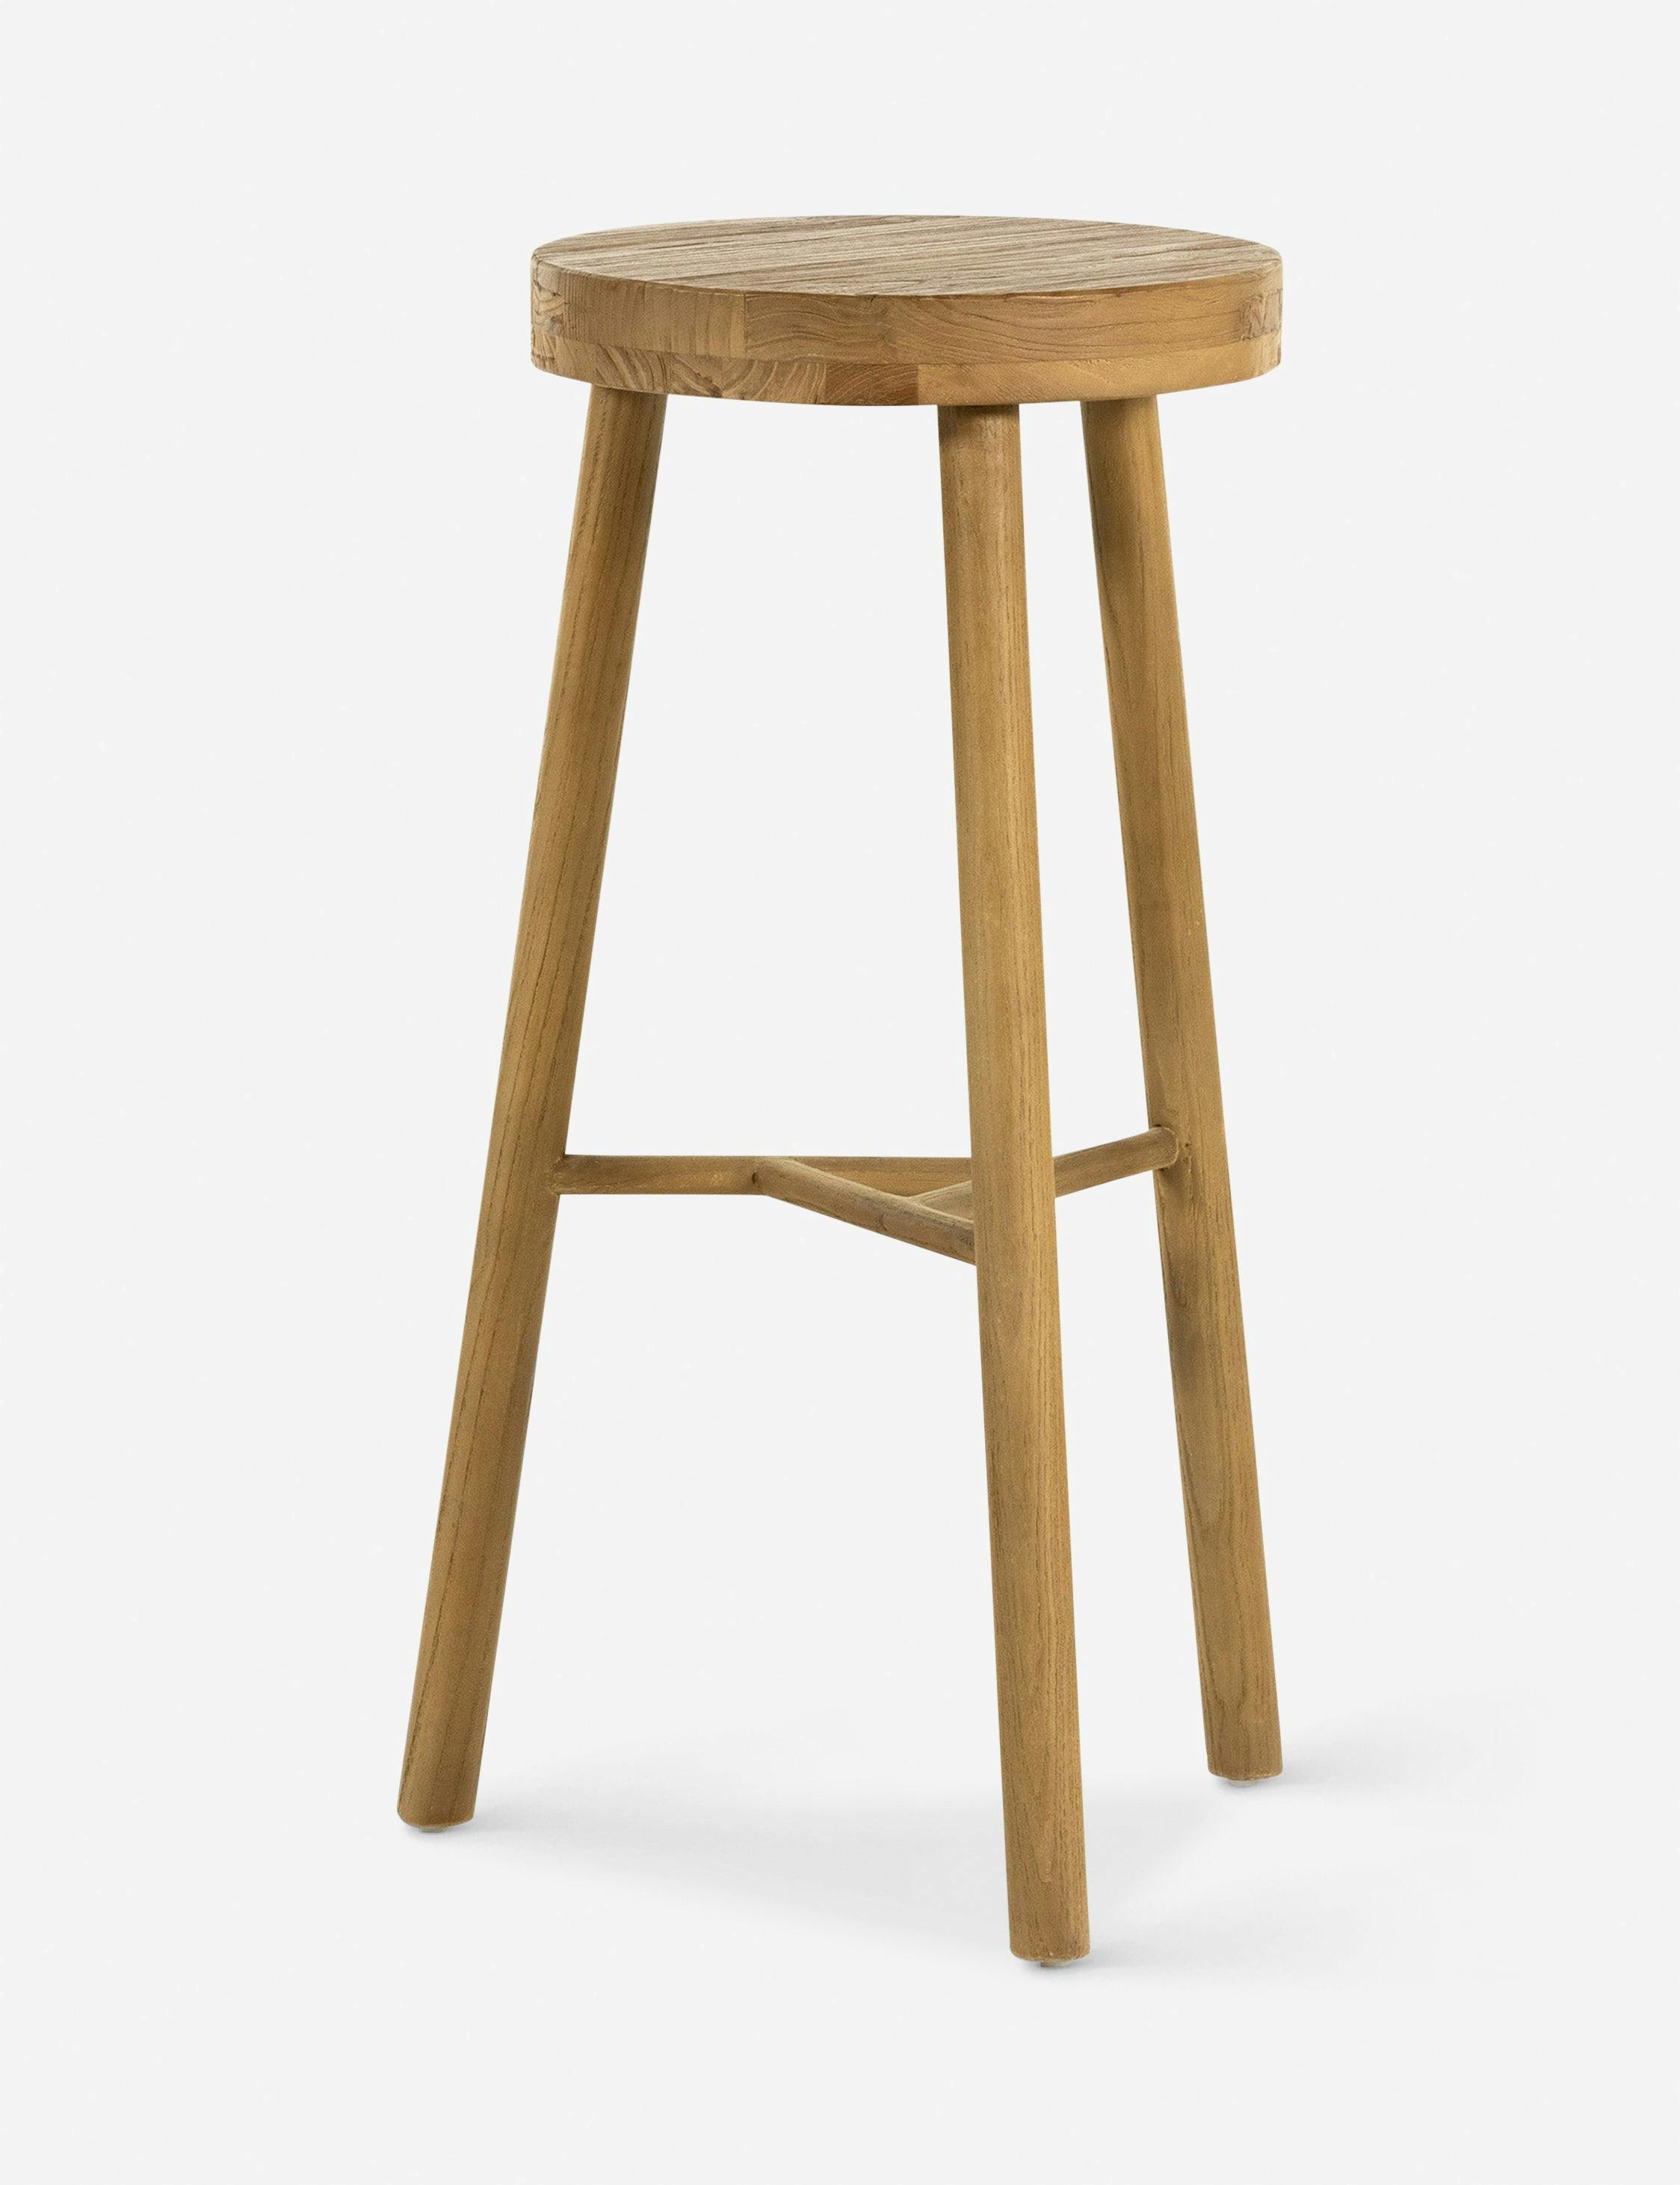 Rustic Nettlewood and Elm Bar Stool in White